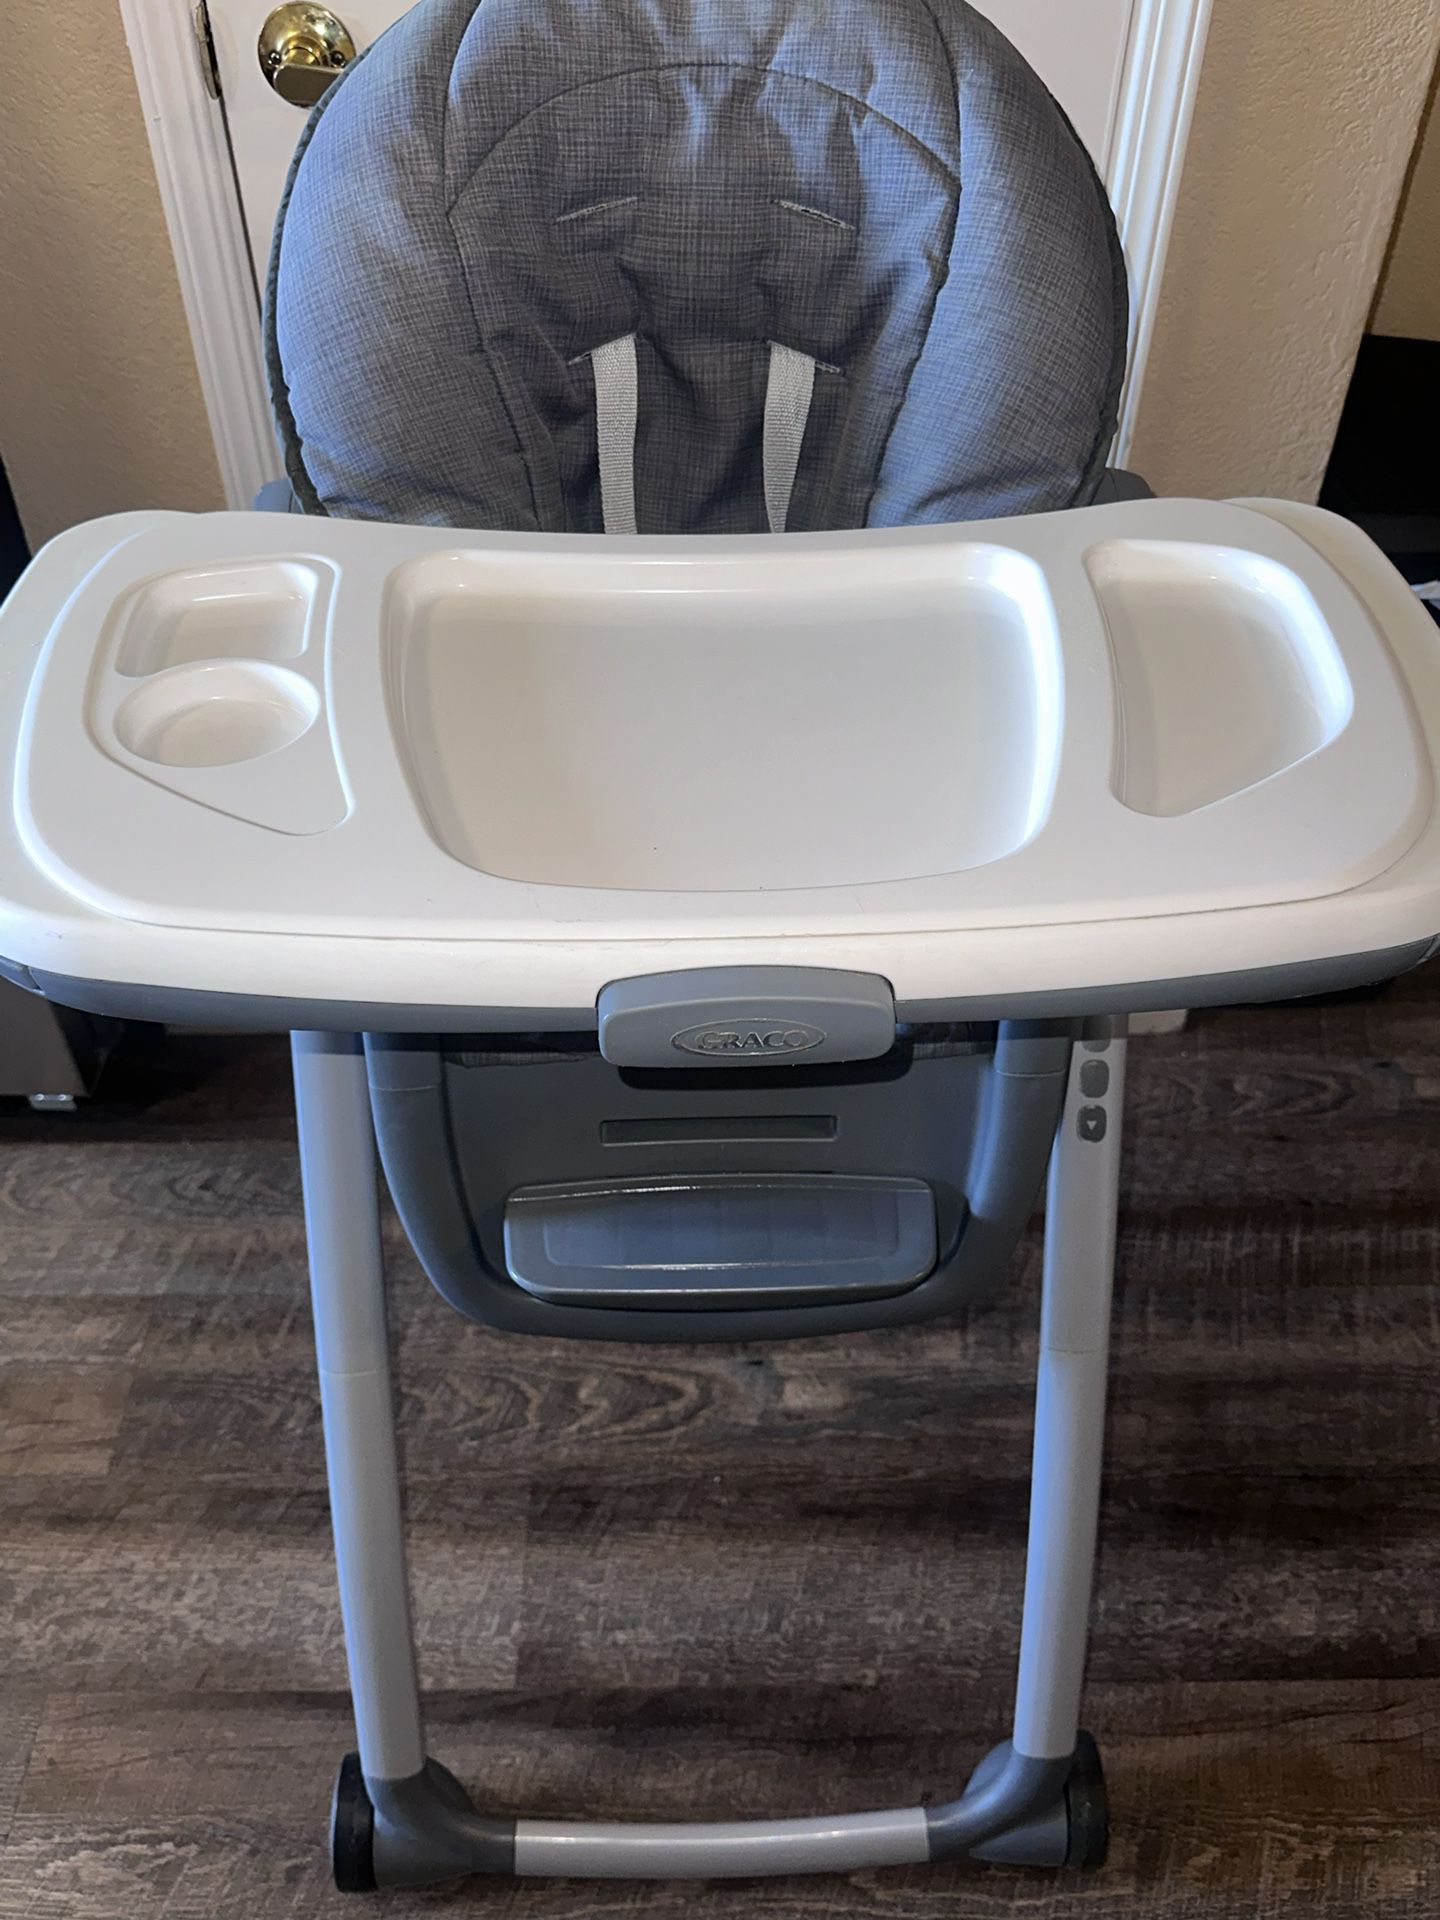 Graco High Chair 7 in 1